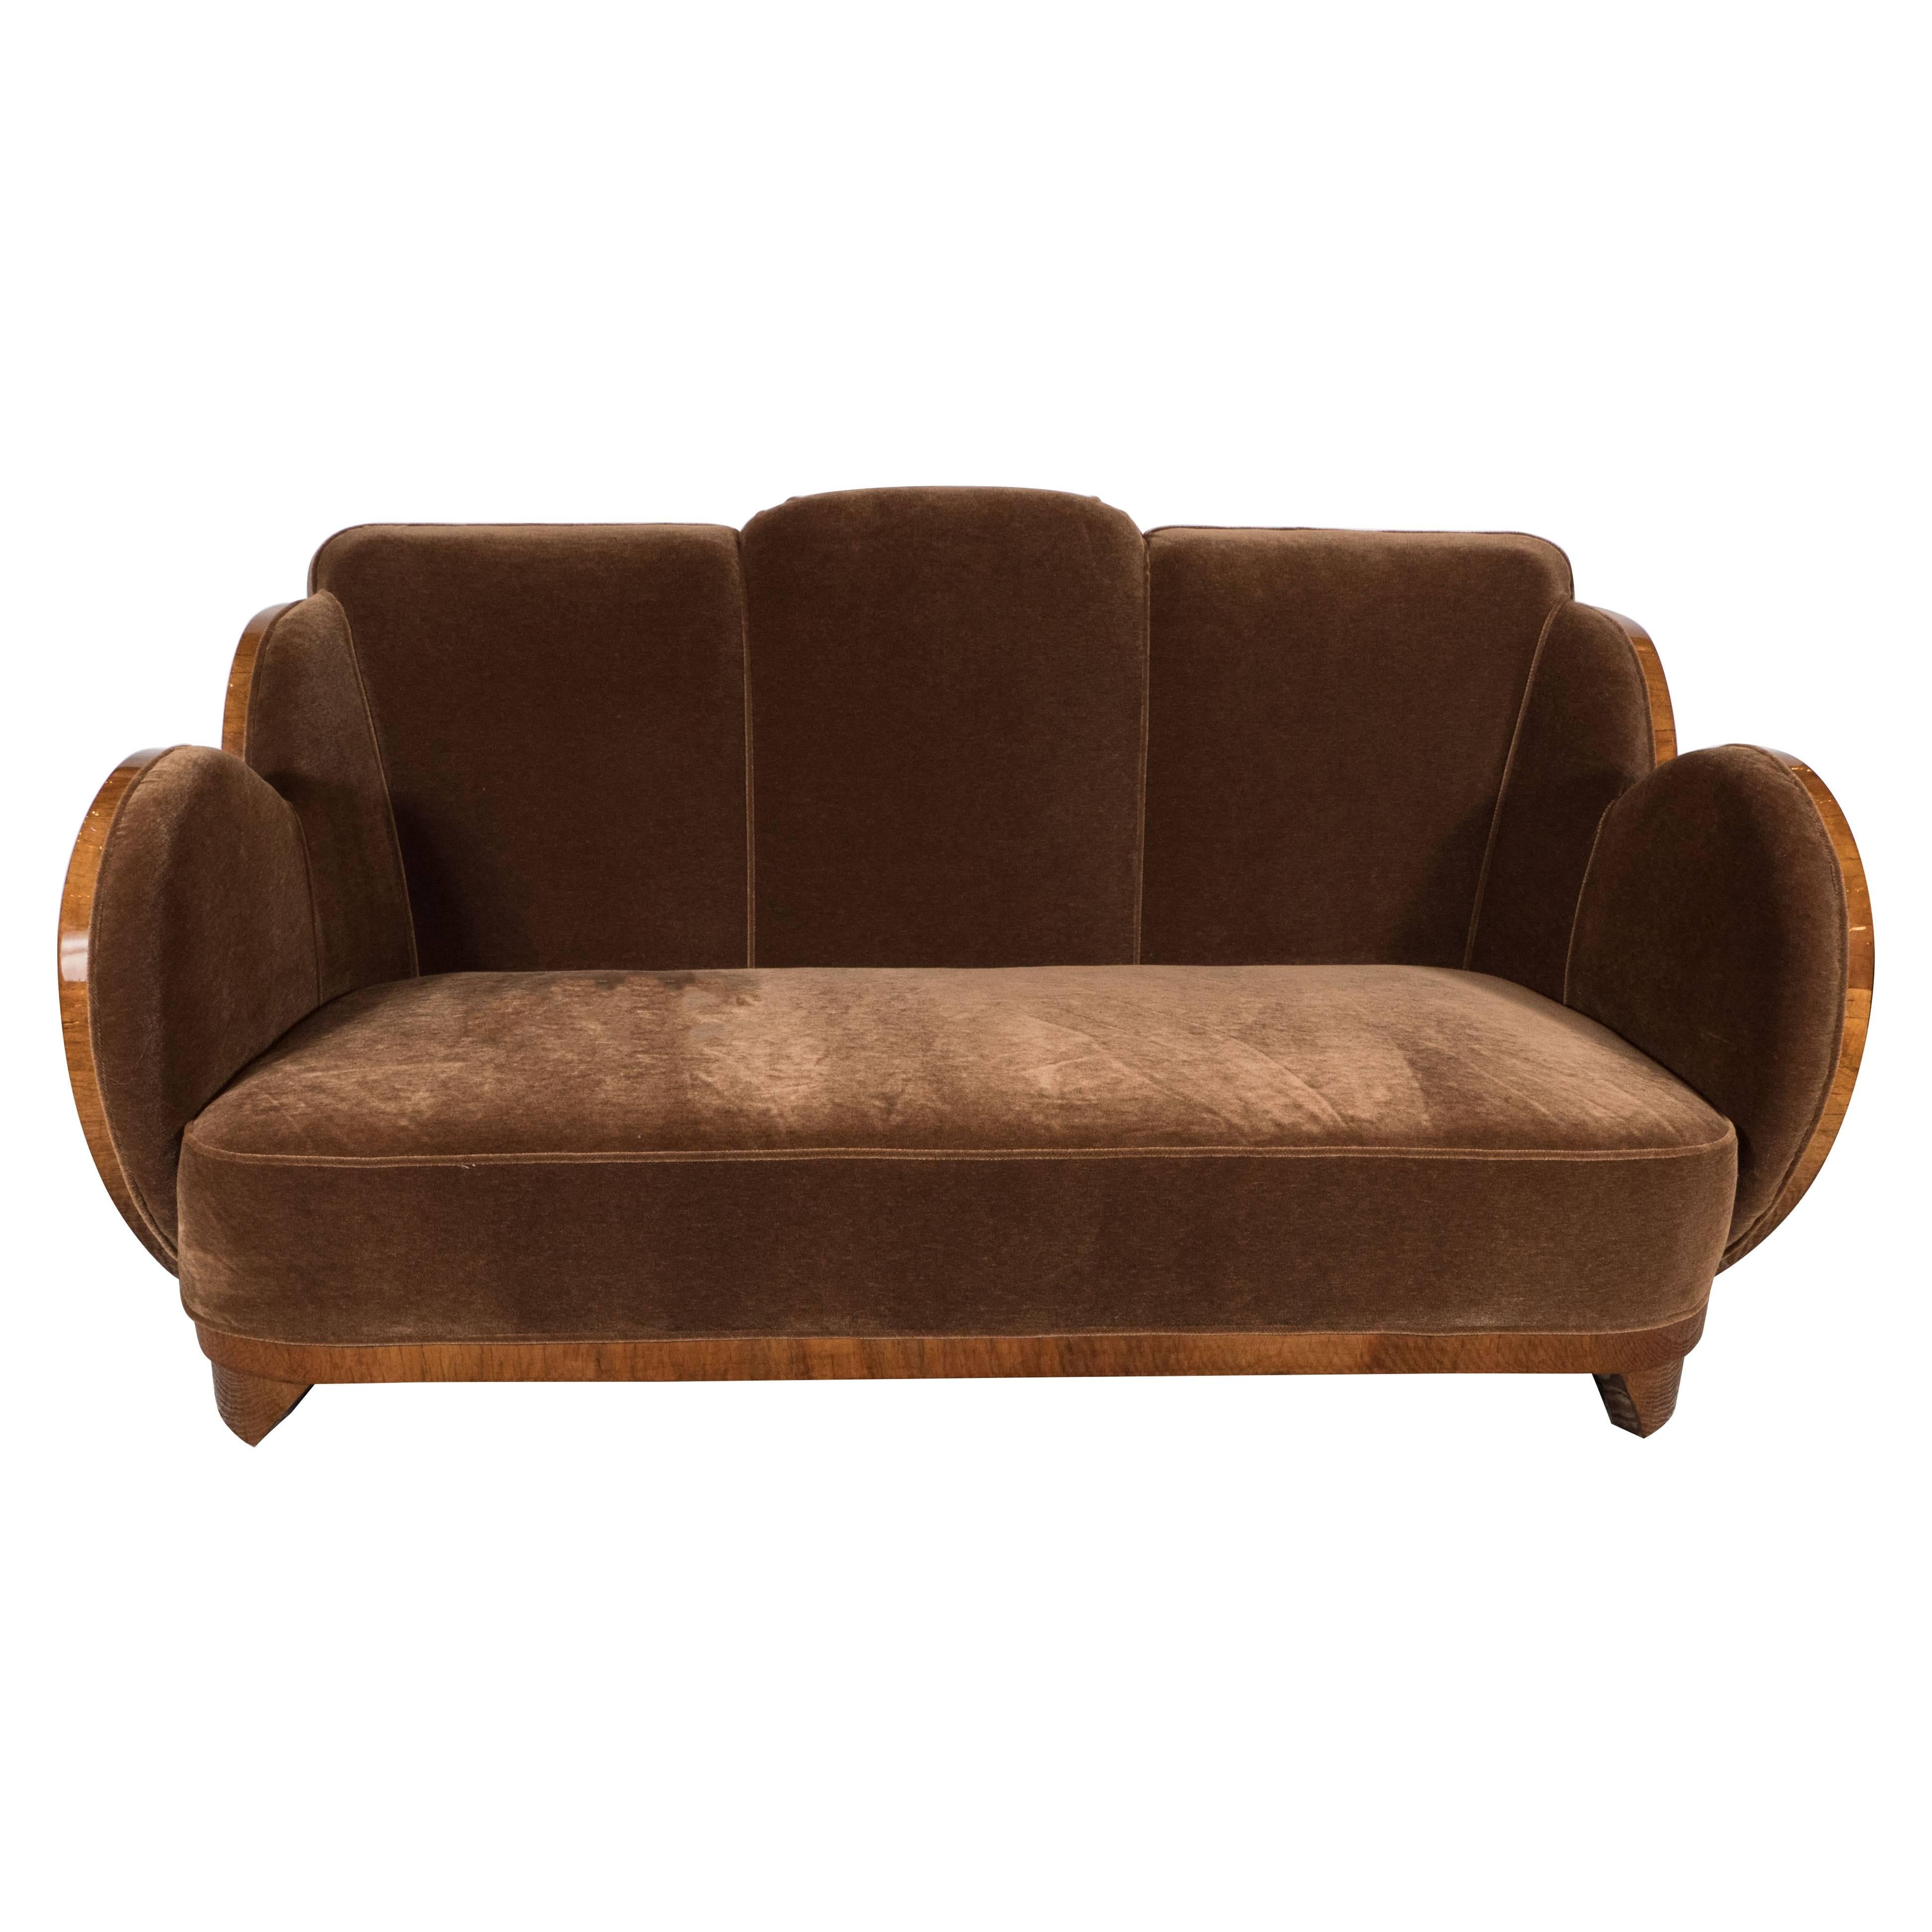 Gorgeous Art Deco "Cloud" Series Sofa in Bookmatched Walnut and Chestnut Mohair